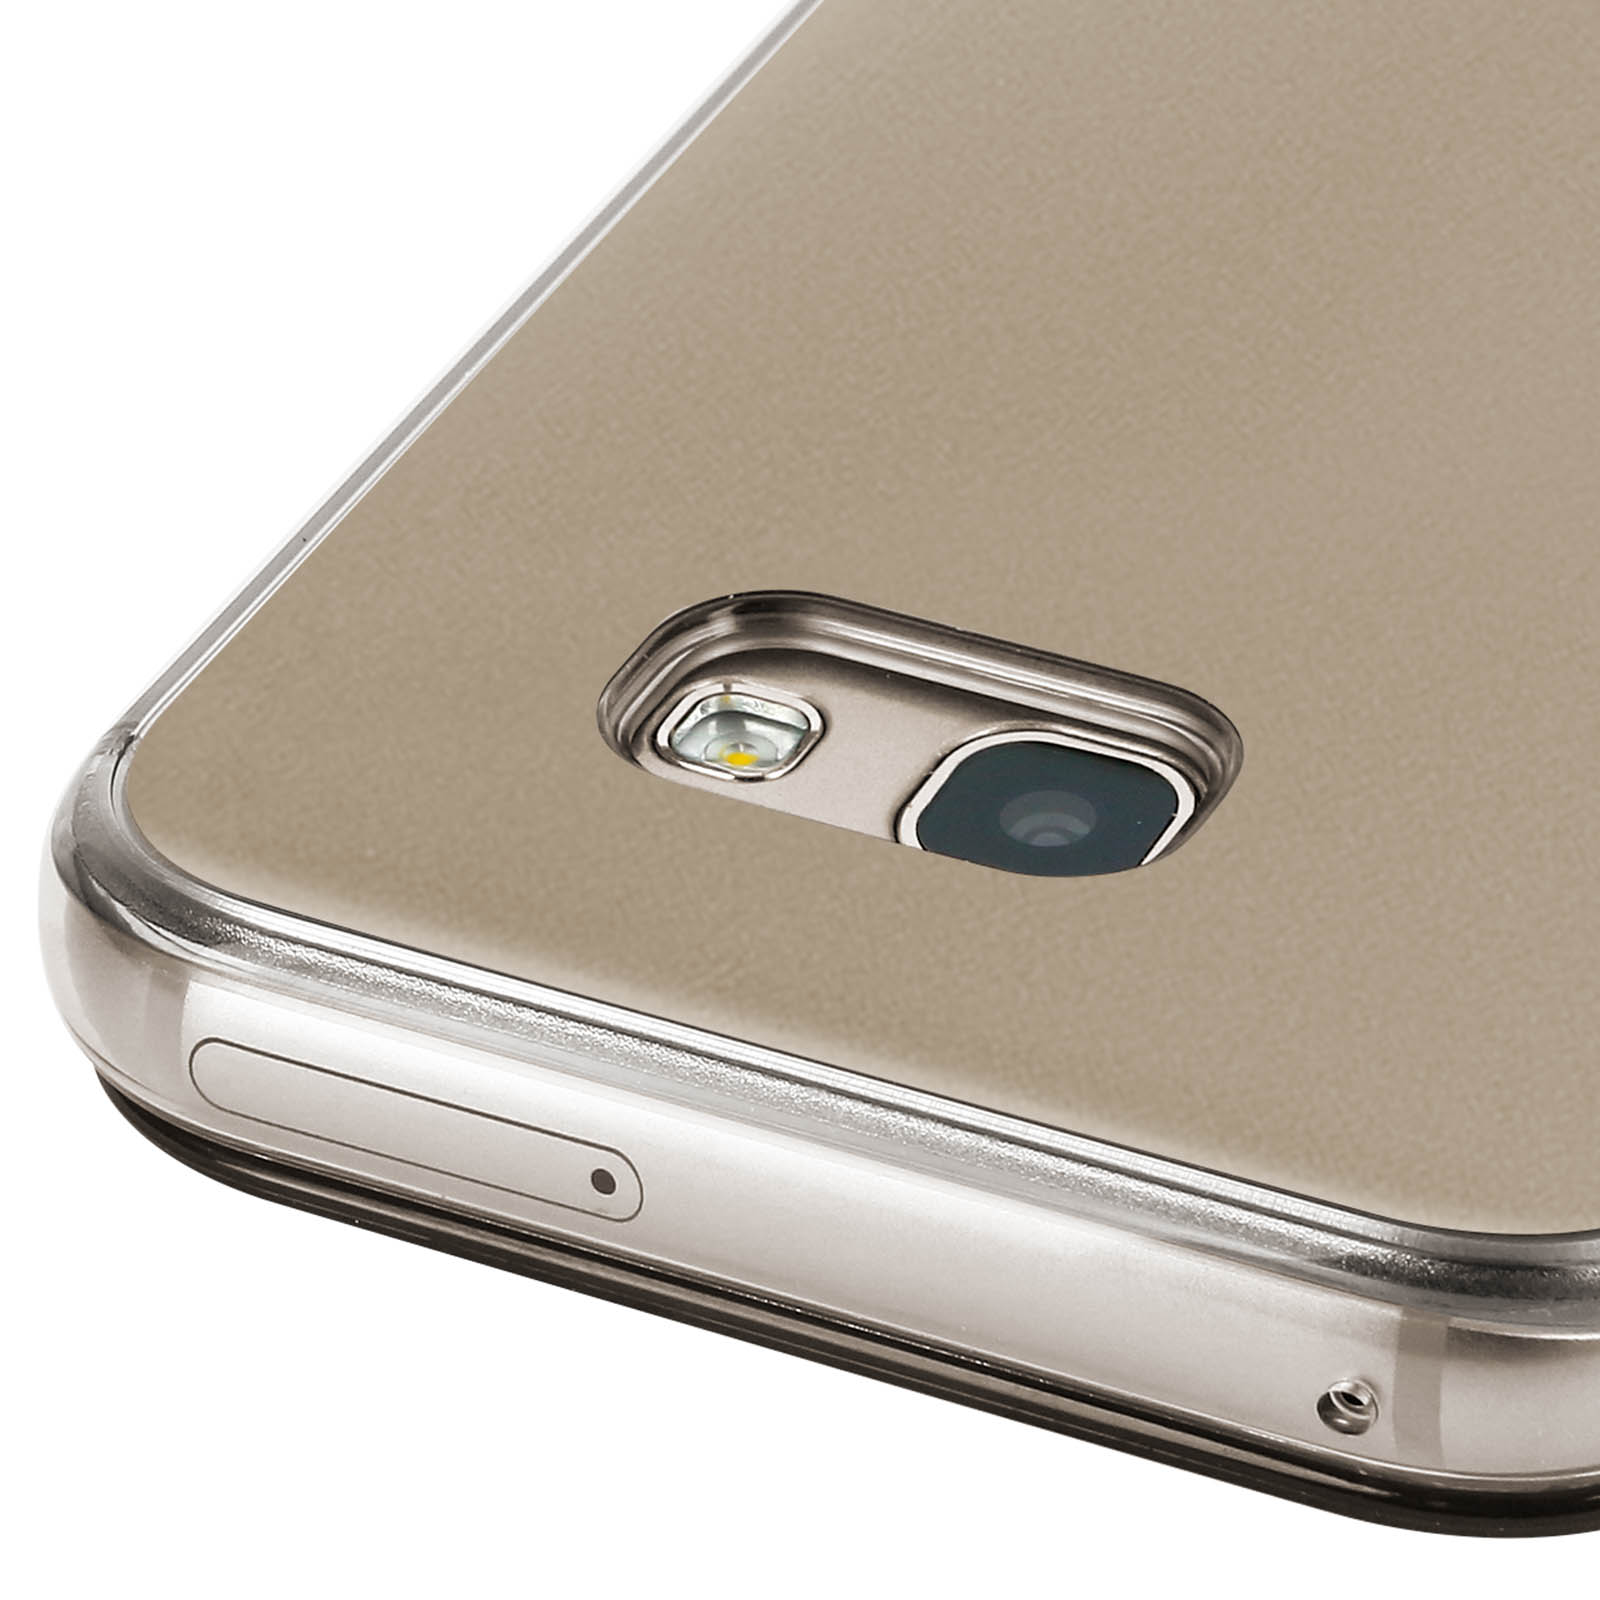 SAMSUNG EF-ZA520 CLEAR (2017), VIEW GAL. Samsung, 2017 Galaxy Gold GOLD COVER, A5 A5 Bookcover